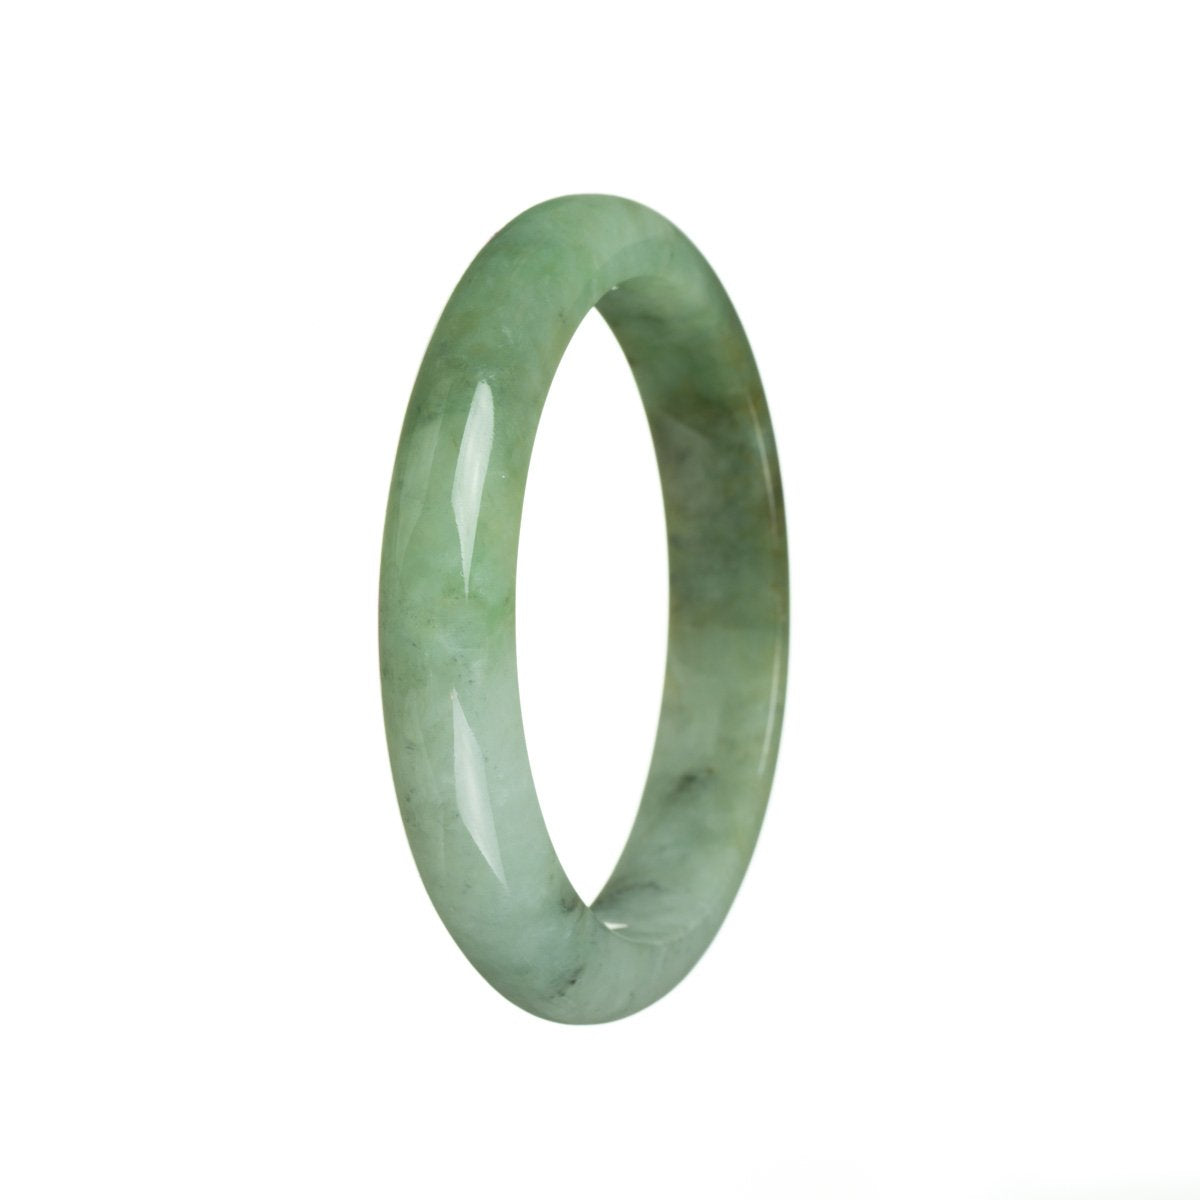 A close-up image of a bracelet made from authentic natural green Burma jade. The bracelet is semi-round in shape and measures 58mm. It is a product of MAYS™.